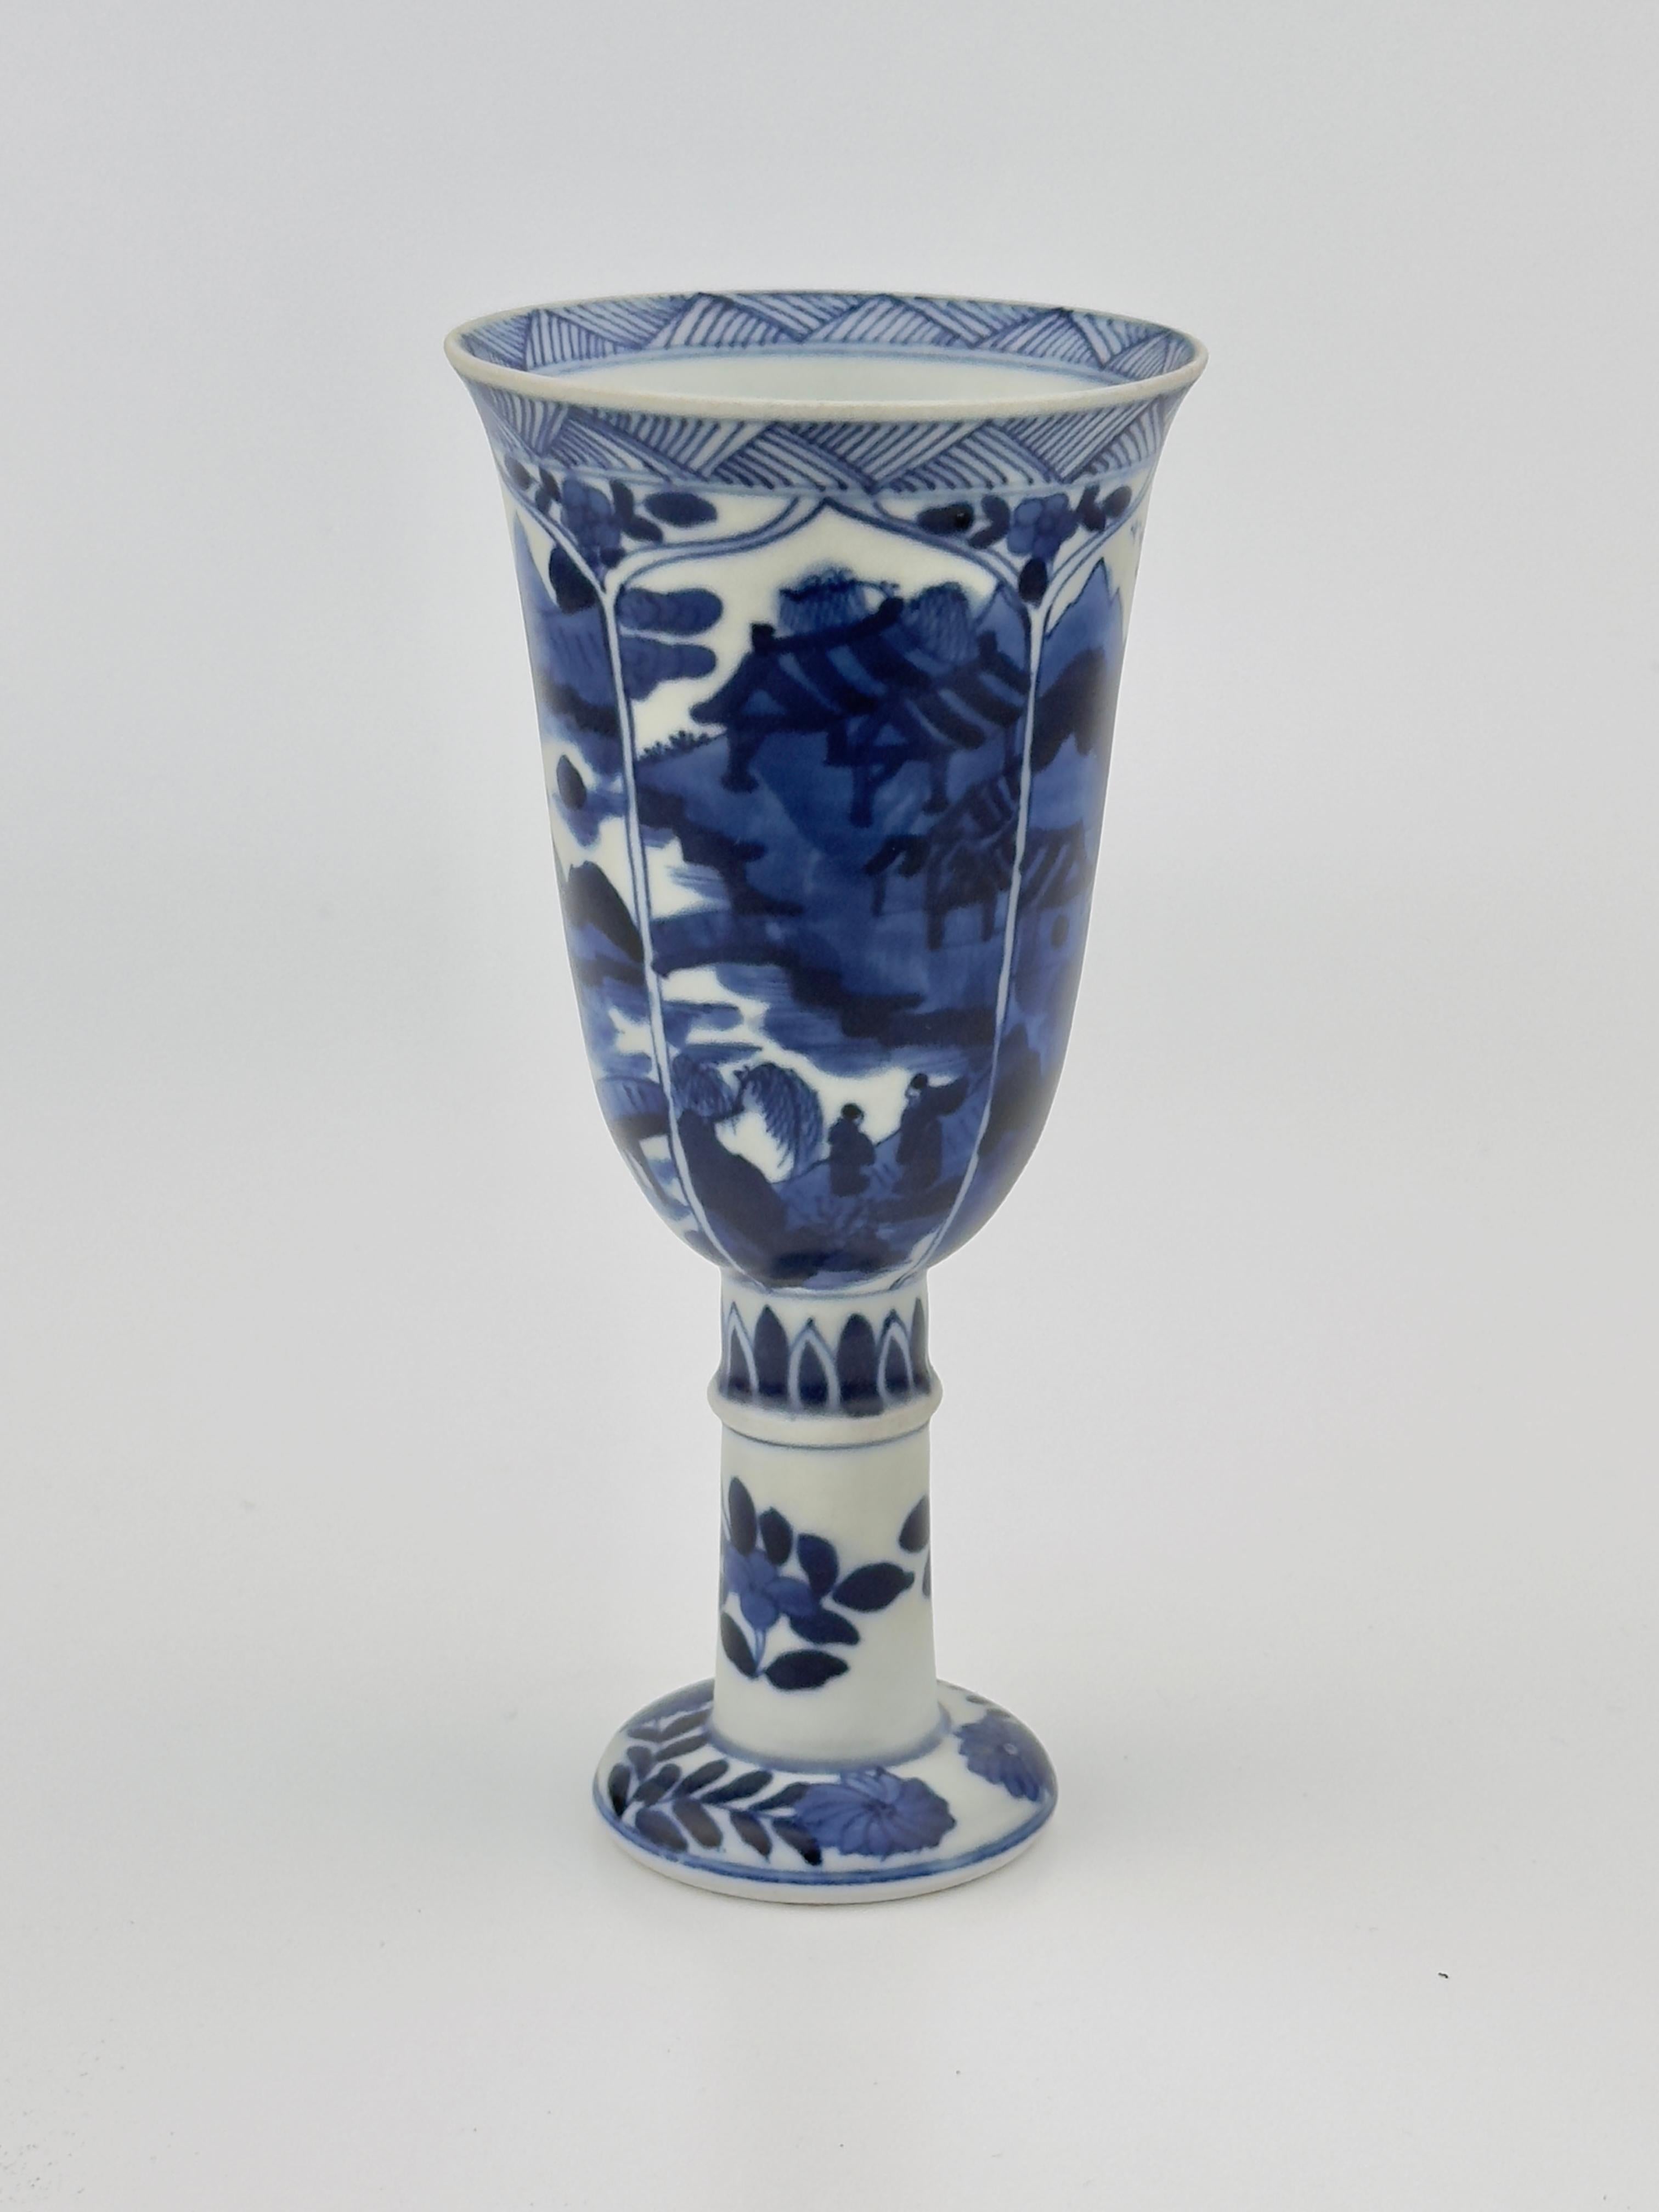 This porcelain stemcup has a domed foot, a high stem and an elongated deep bowl with a partially broken flared rim. River landscapes featuring trees, pavilions, bridges and figures, are painted in four vertical panels in underglaze blue. Used for